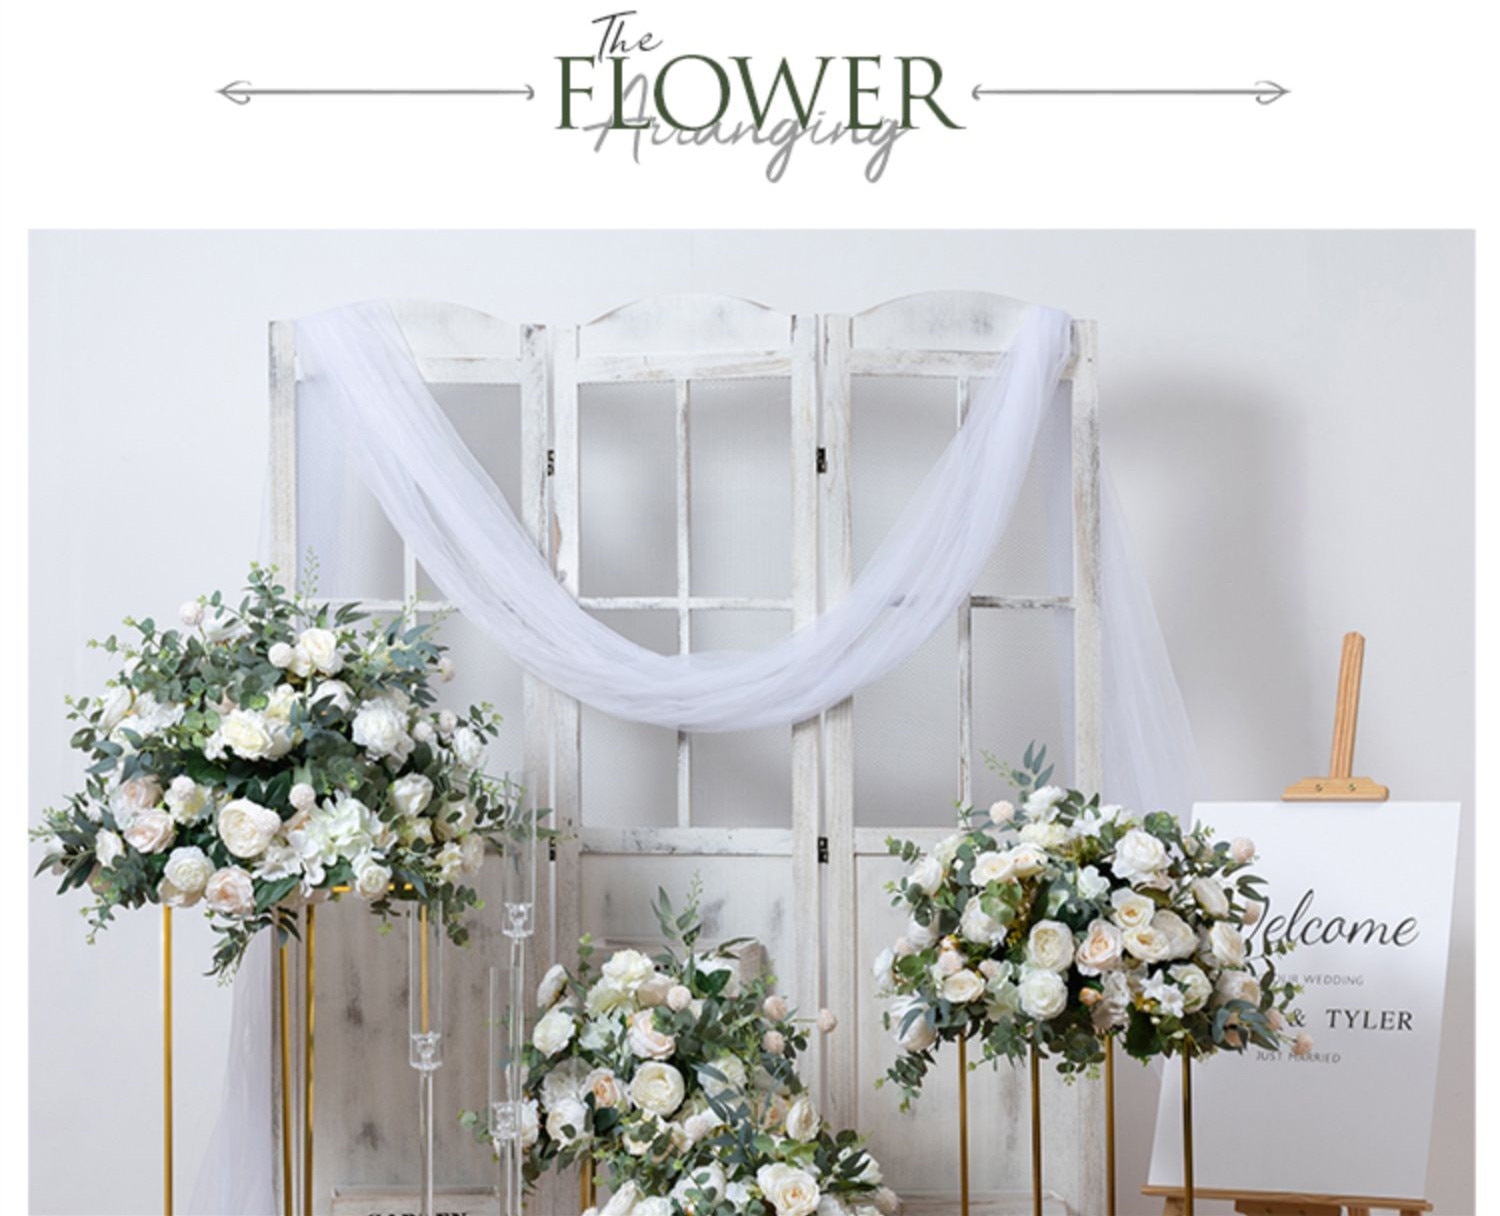 Choosing the right materials for a DIY flower stand